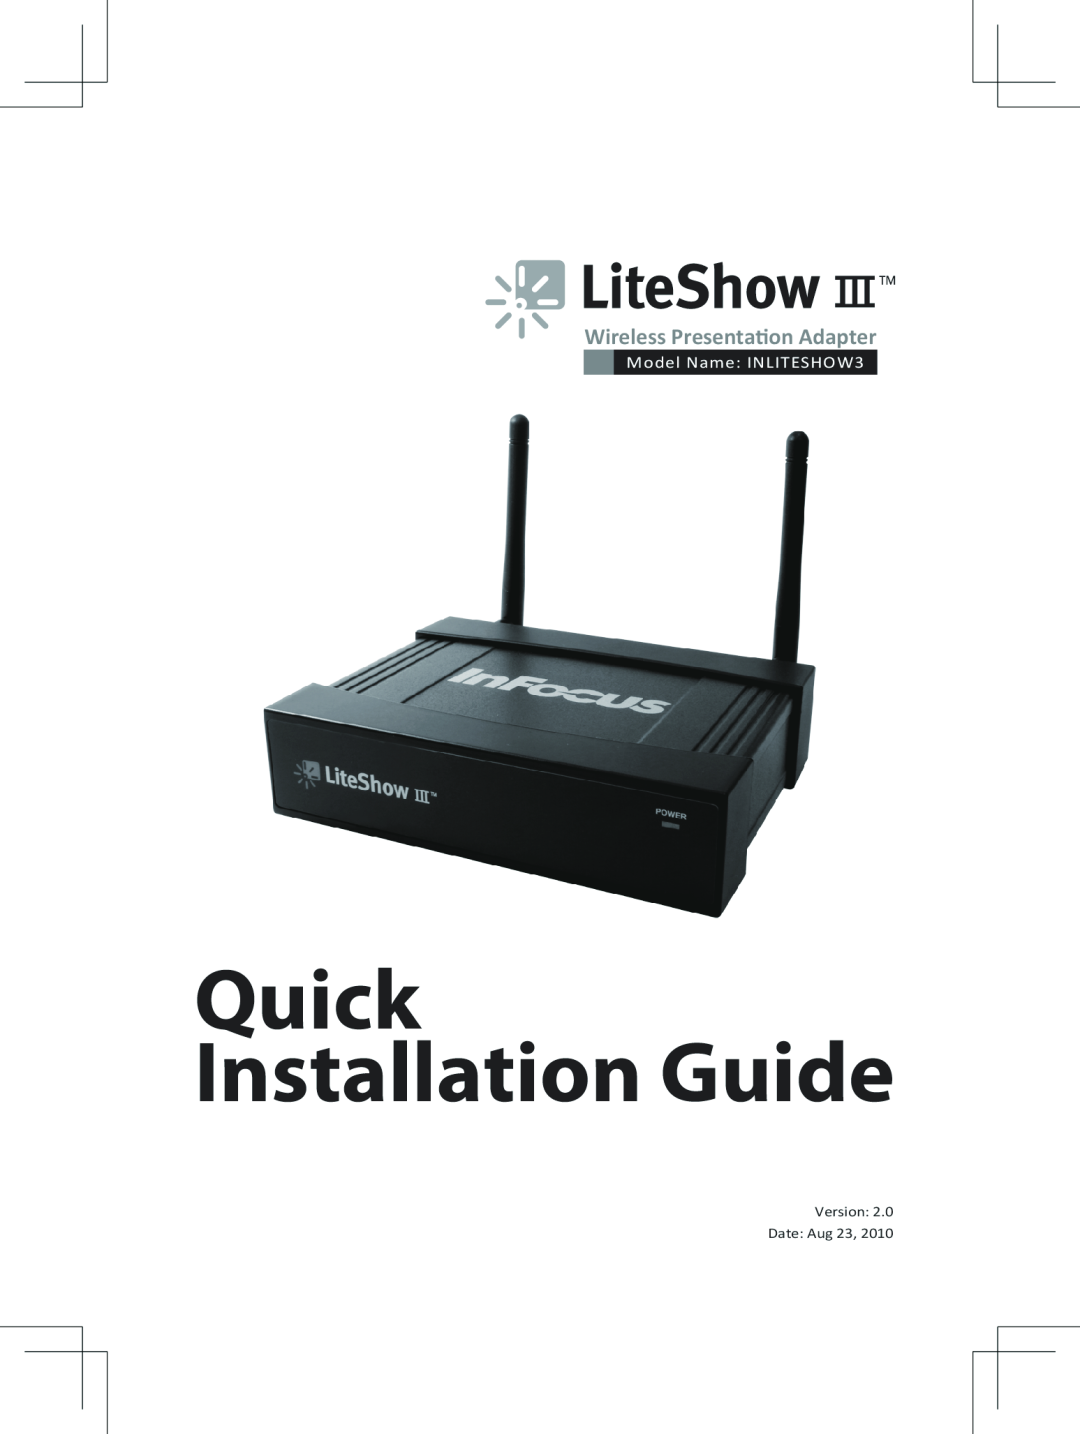 InFocus manual Quick Installation Guide, Wireless Presentation Adapter, Model Name INLITESHOW3, Version Date Aug 23 